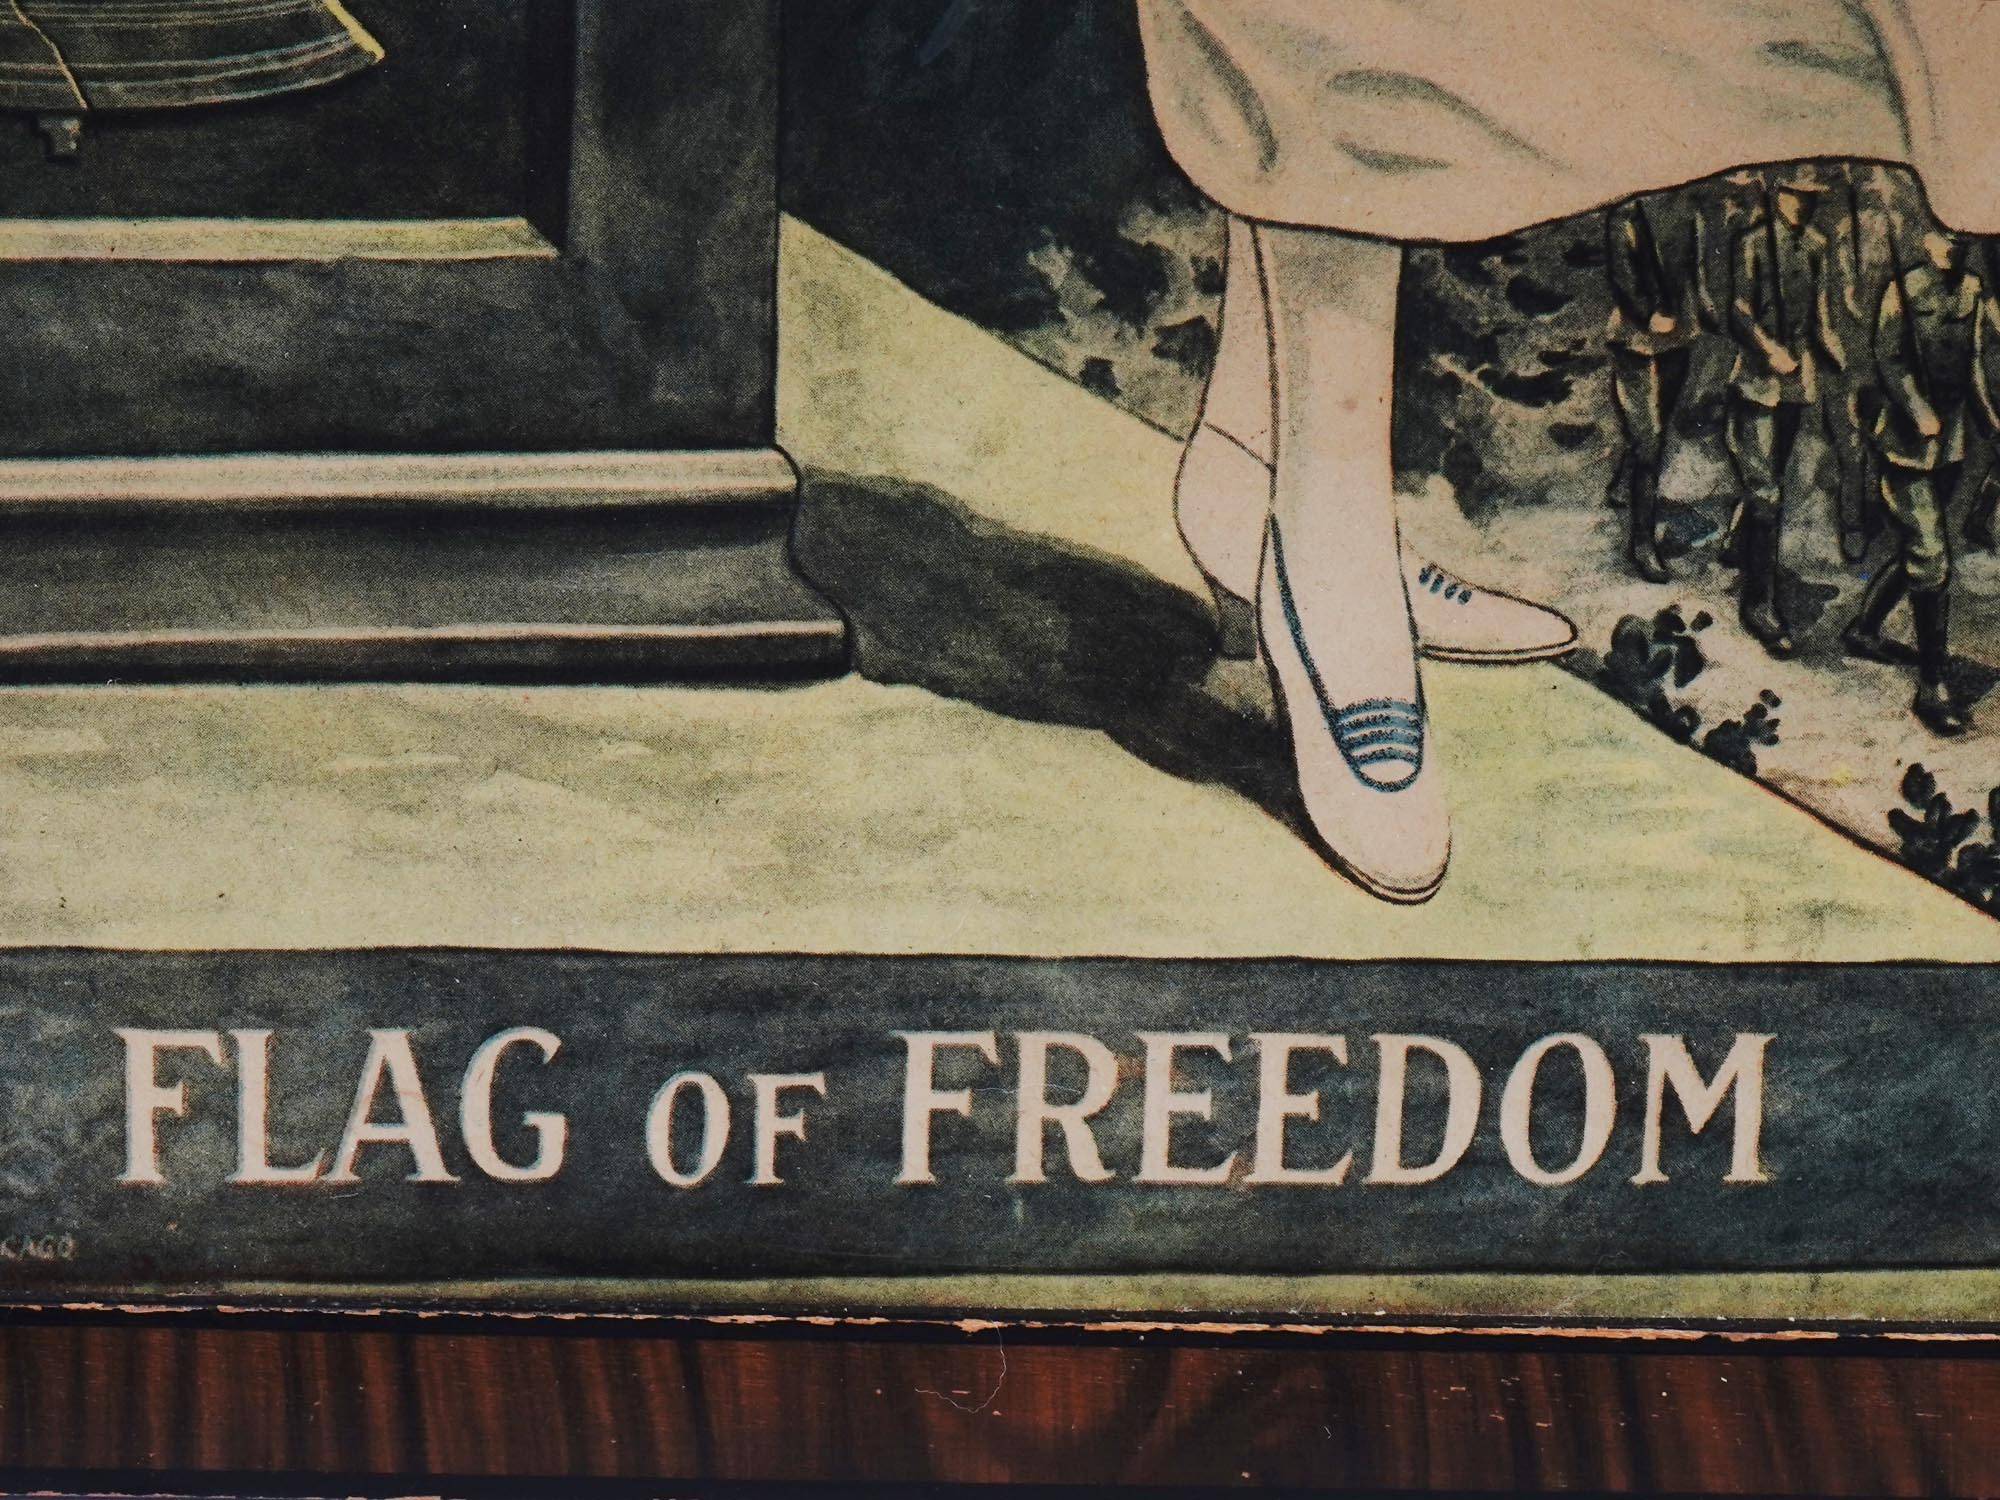 WWI AMERICAN FLAG OF FREEDOM POSTER BY EG RENESCH PIC-2